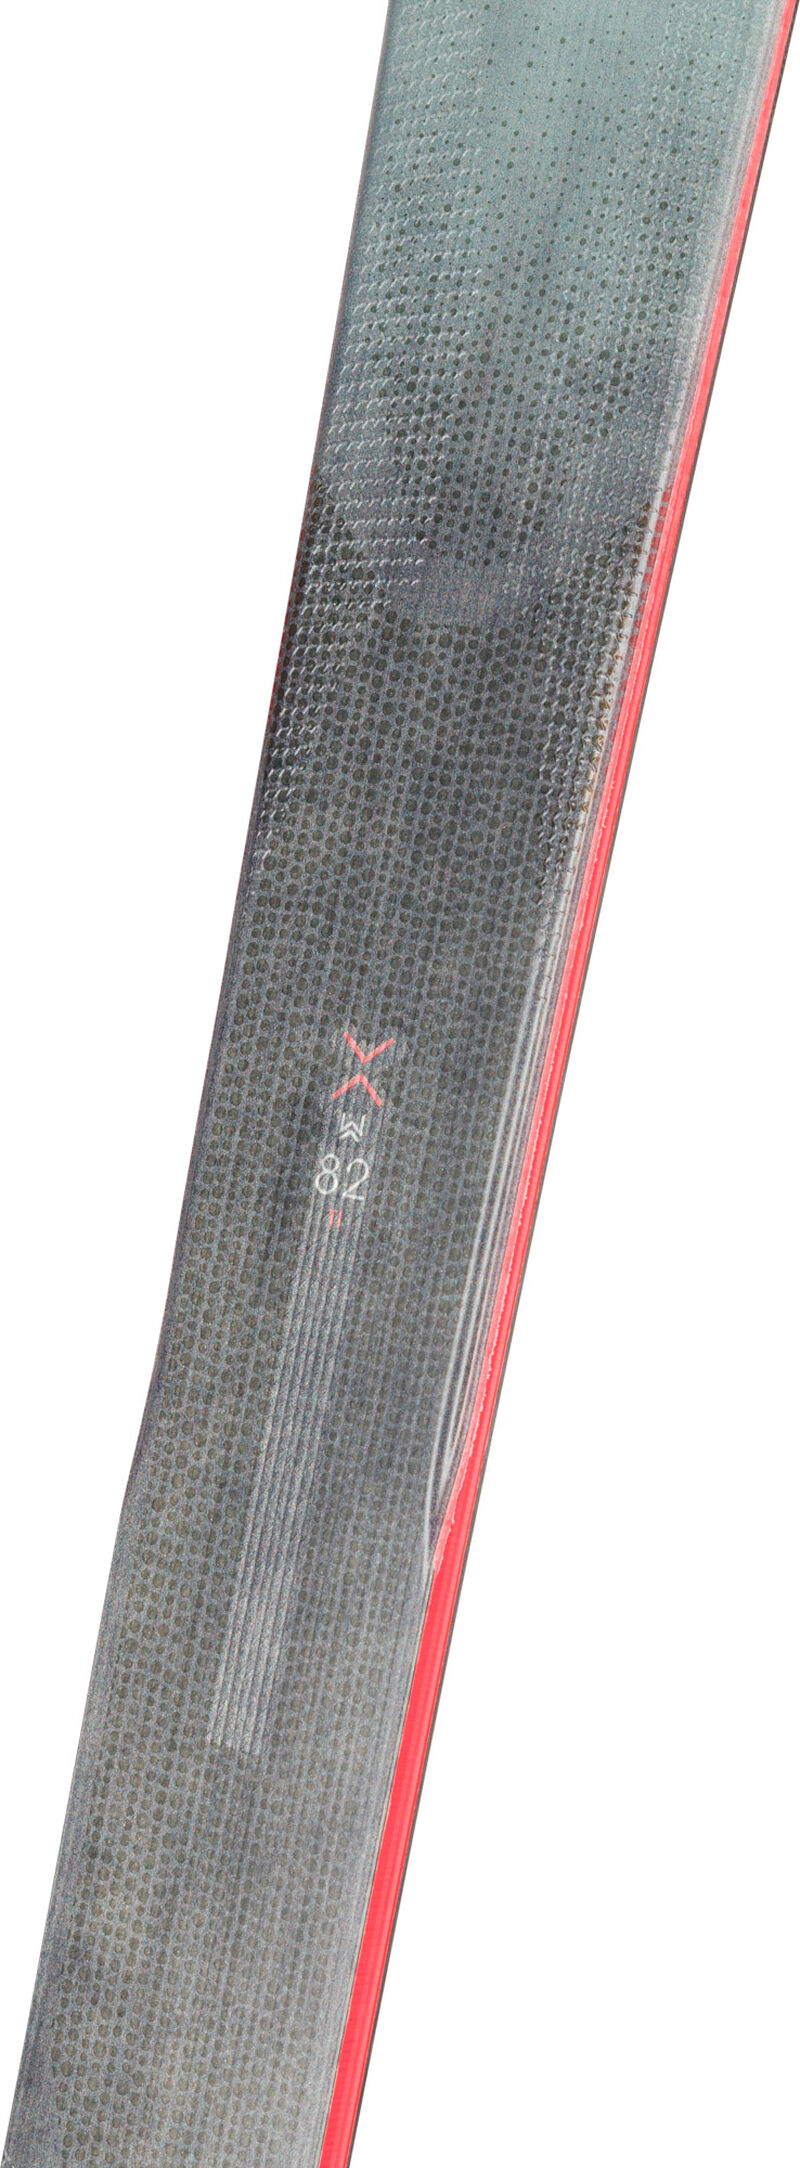 Rossignol Skis All Mountain femme EXPERIENCE W 82 Ti (OPEN) 